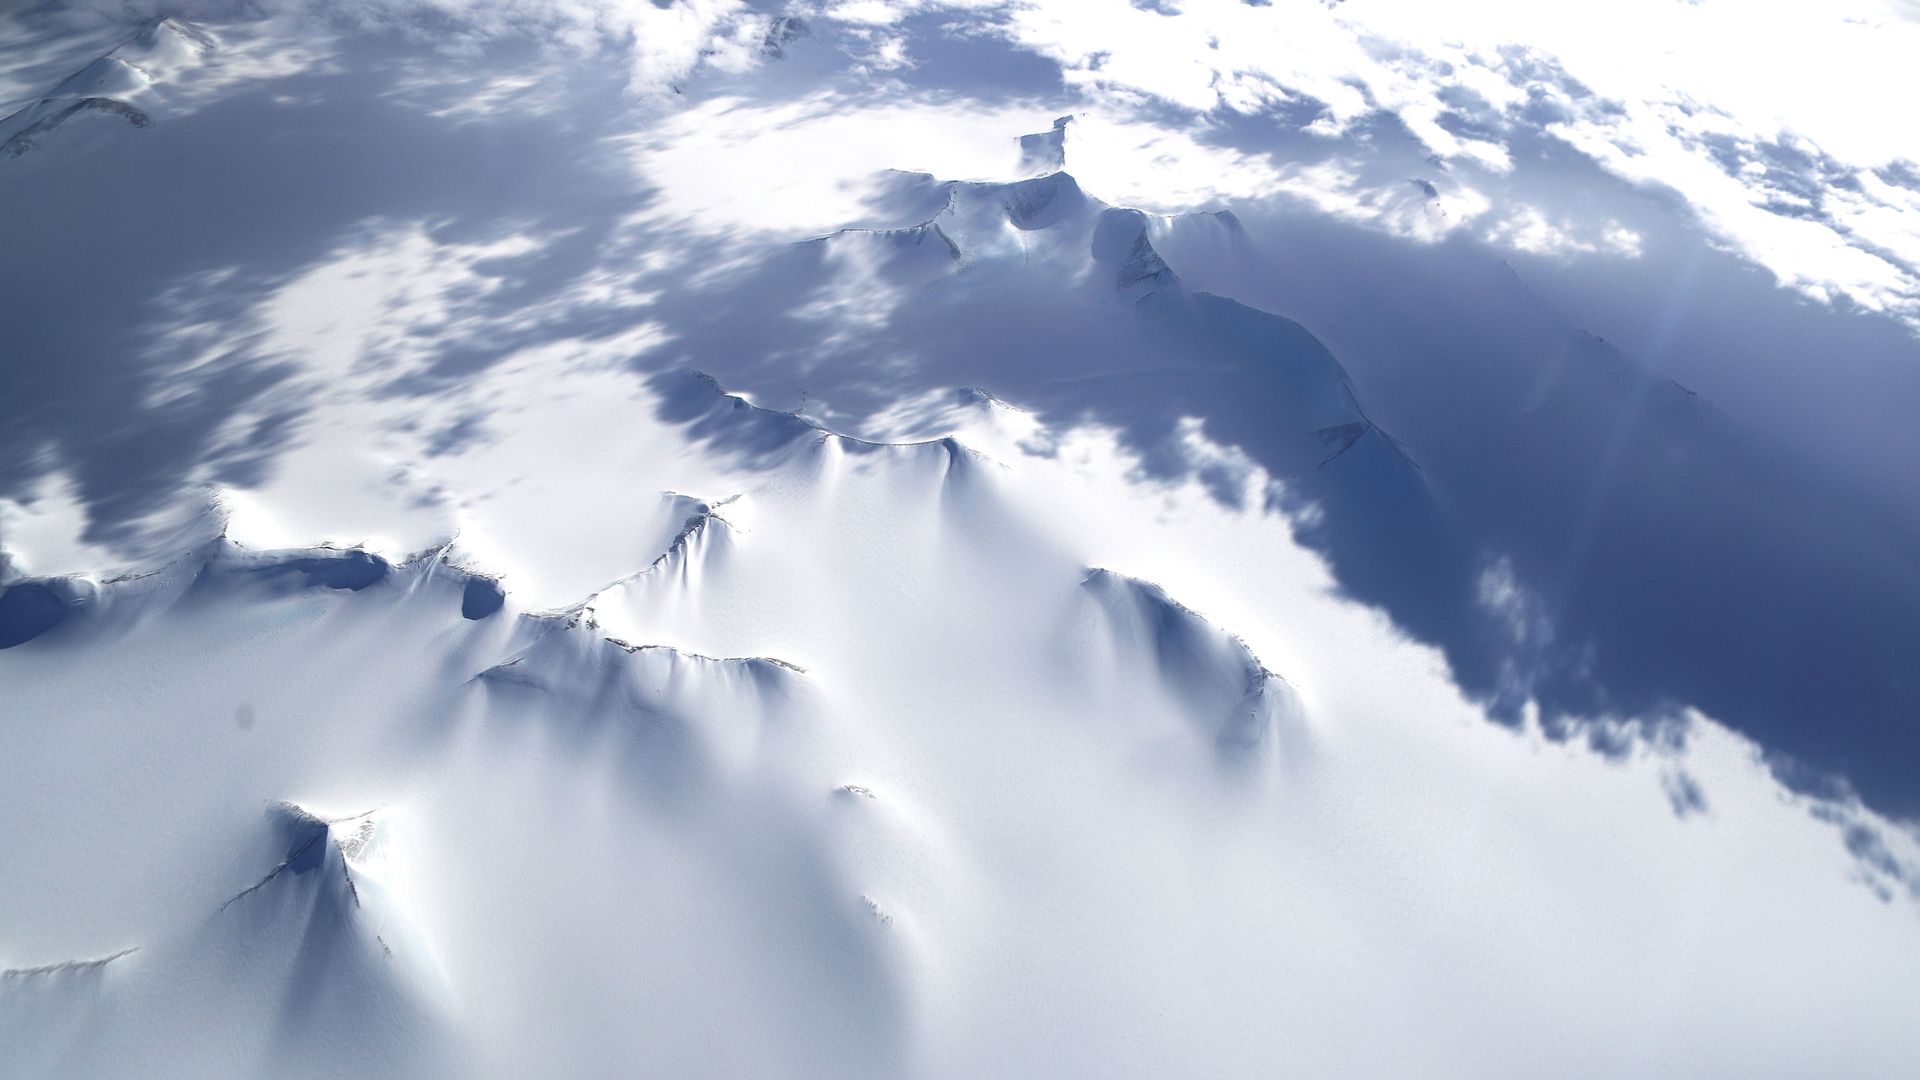 Antarctic ice sheet seen from the air.